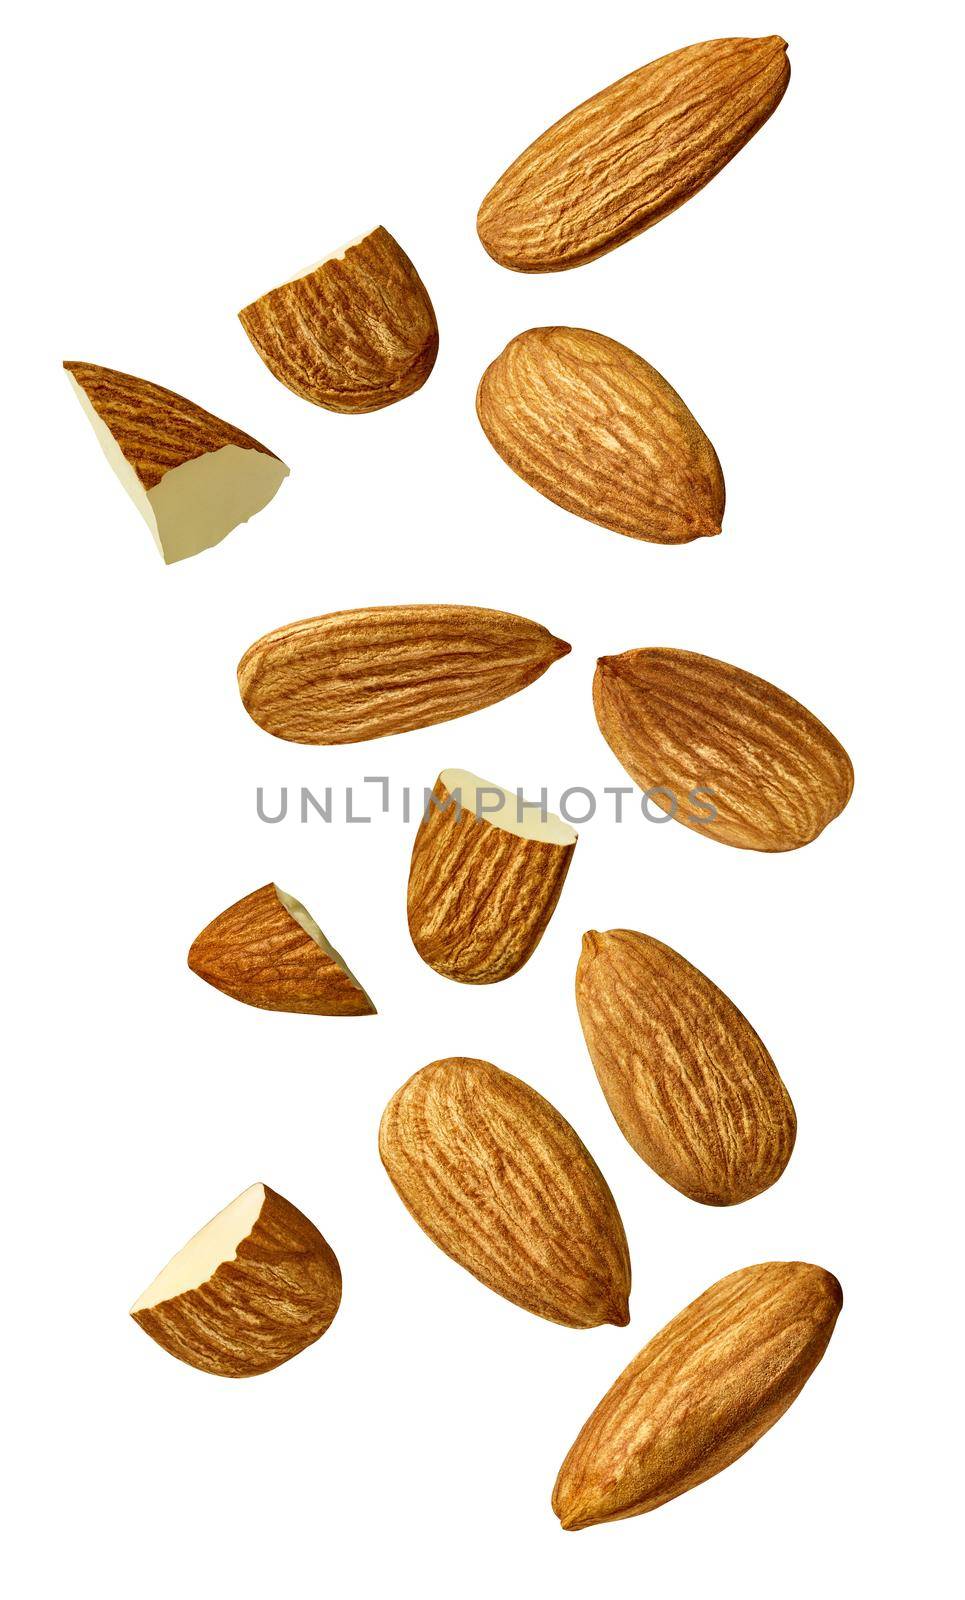 almond nut food healthy organic natural ingredient snack isolated seed brown fruit closeup nutrition group by Picsfive